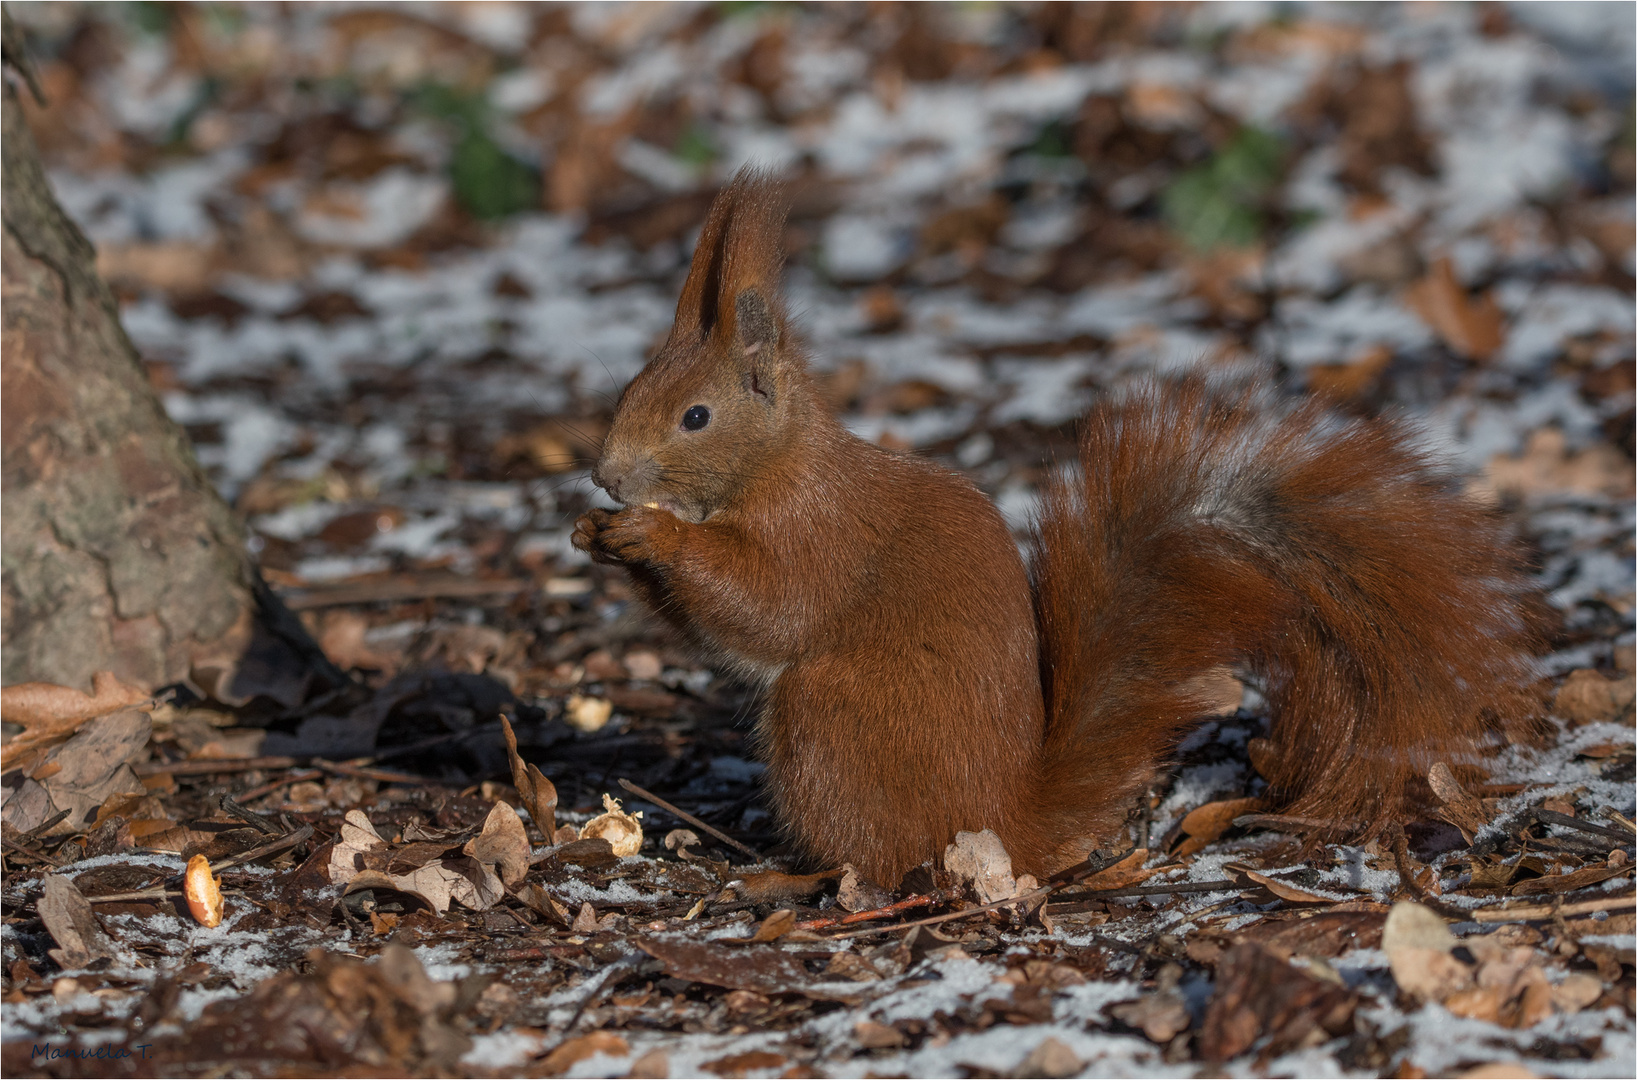  Red squirrel in winter